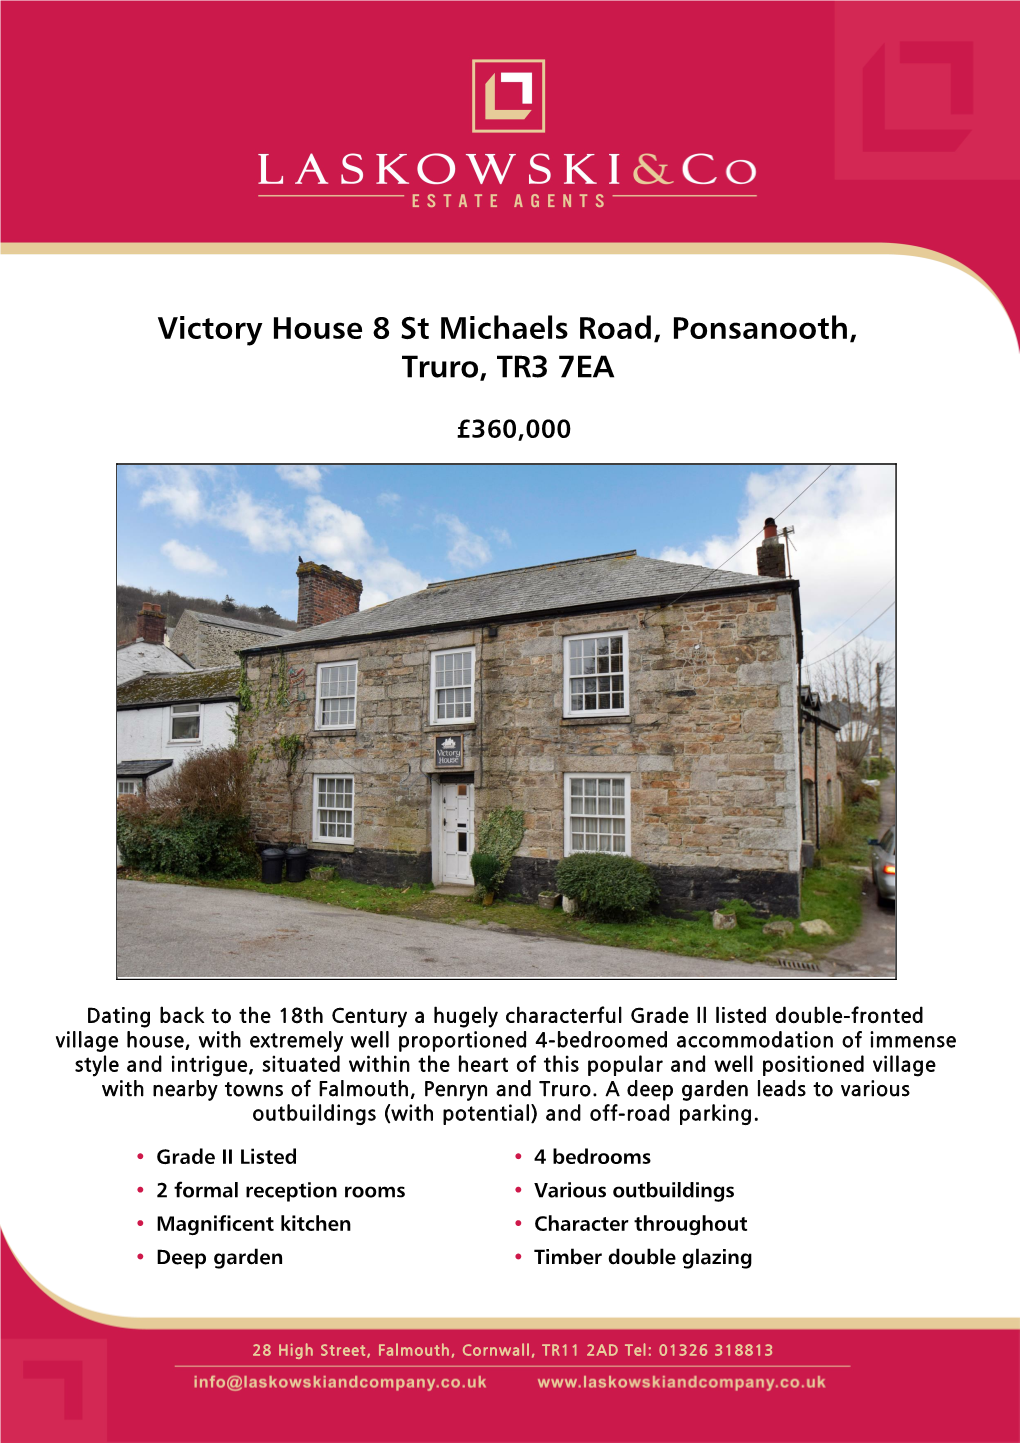 Victory House 8 St Michaels Road, Ponsanooth, Truro, TR3 7EA